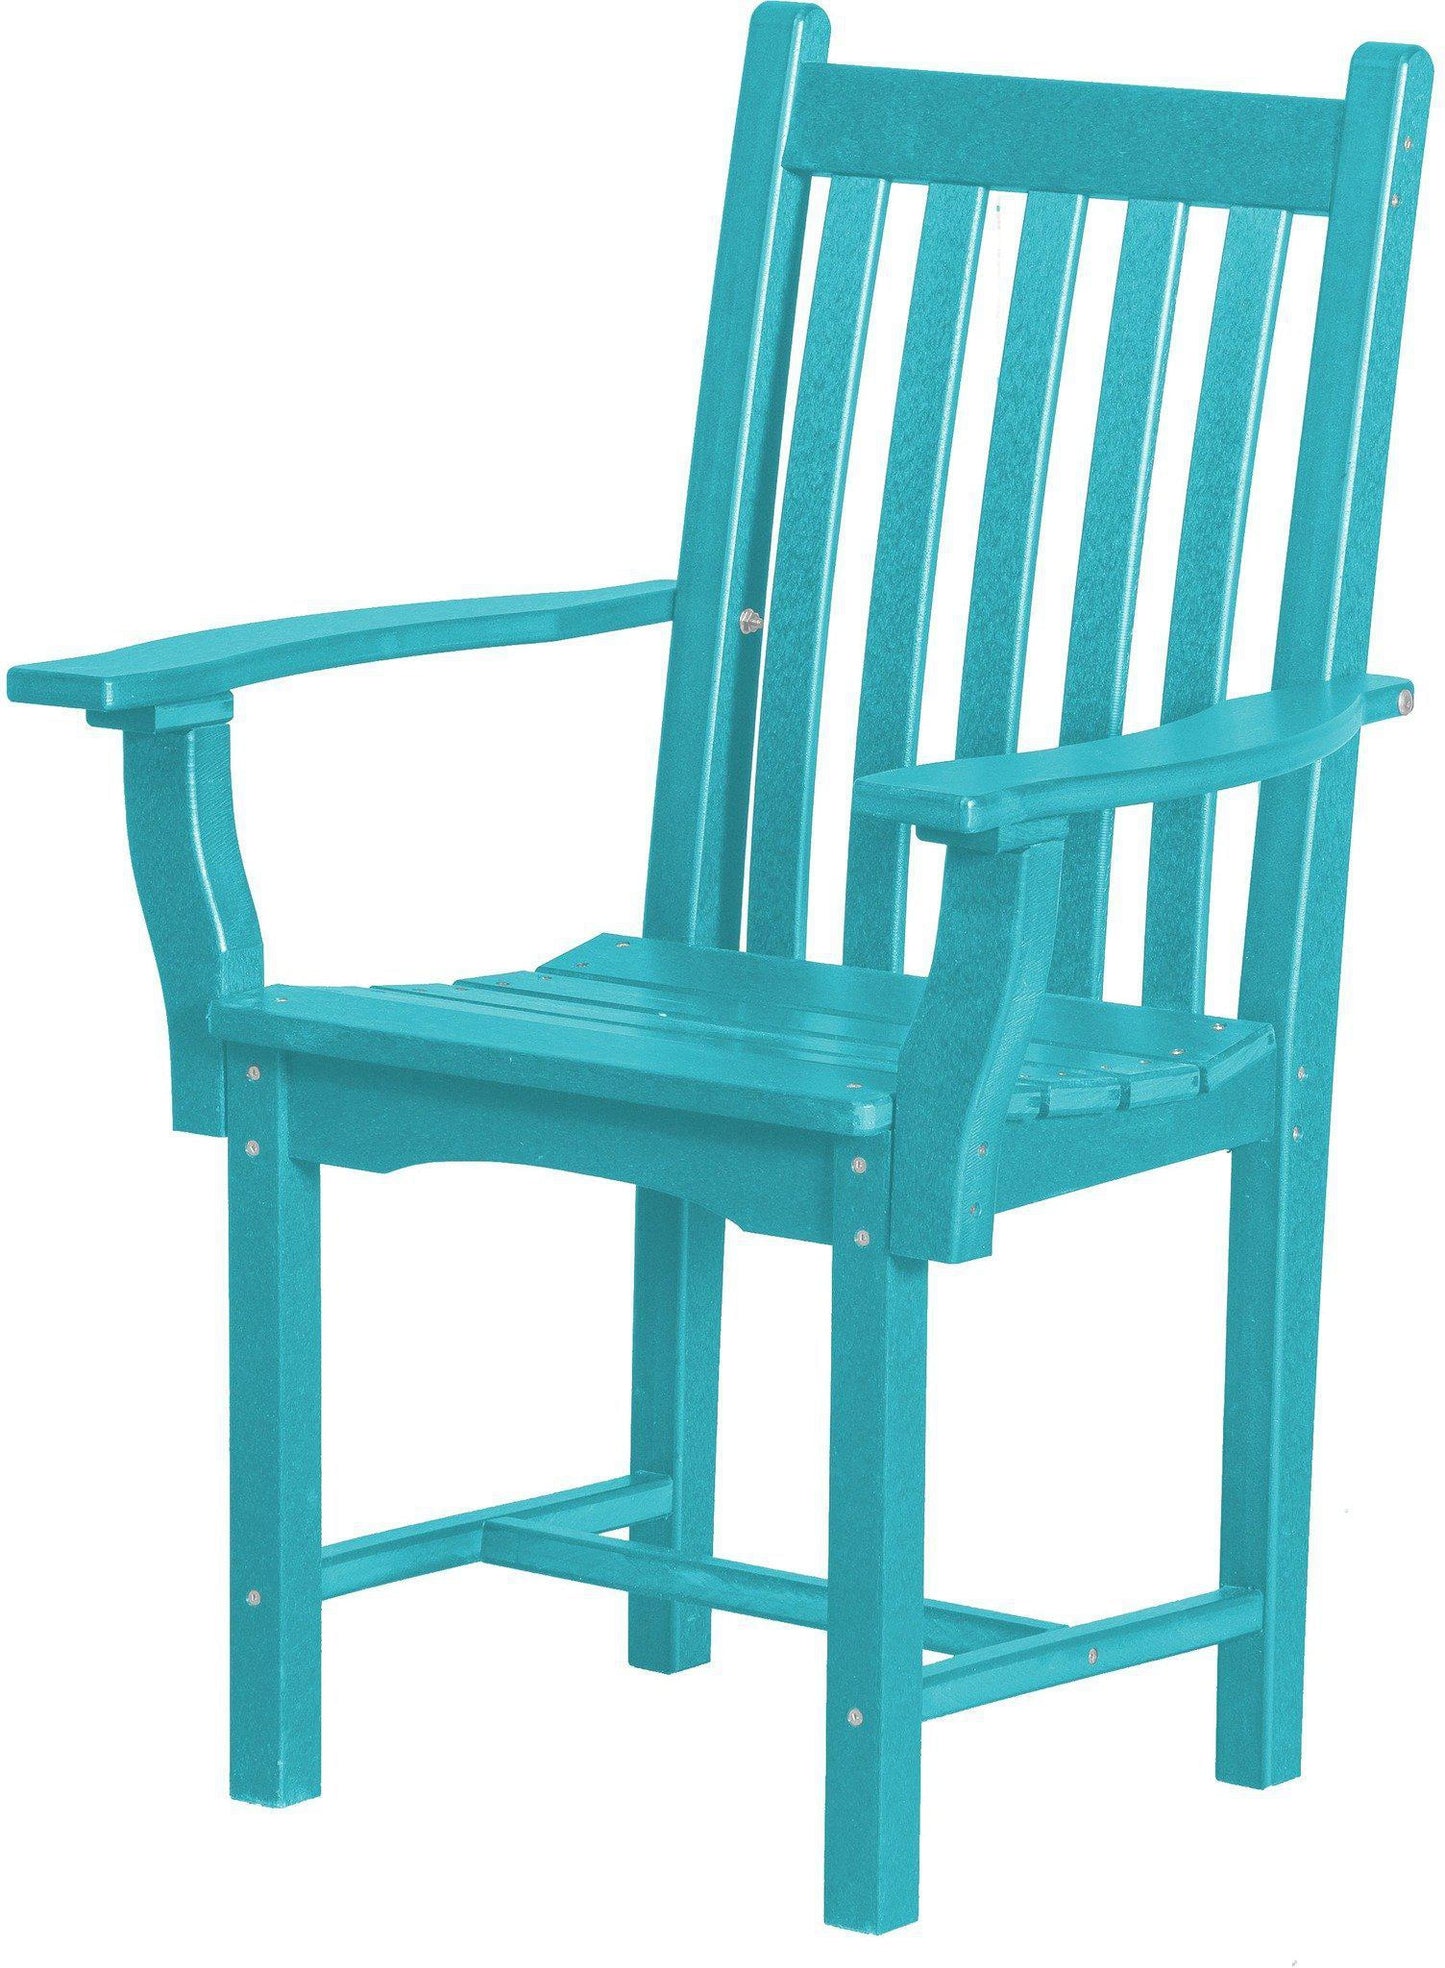 Wildridge Outdoor Recycled Plastic Classic Dining Chair with Arms - LEAD TIME TO SHIP 4 WEEKS